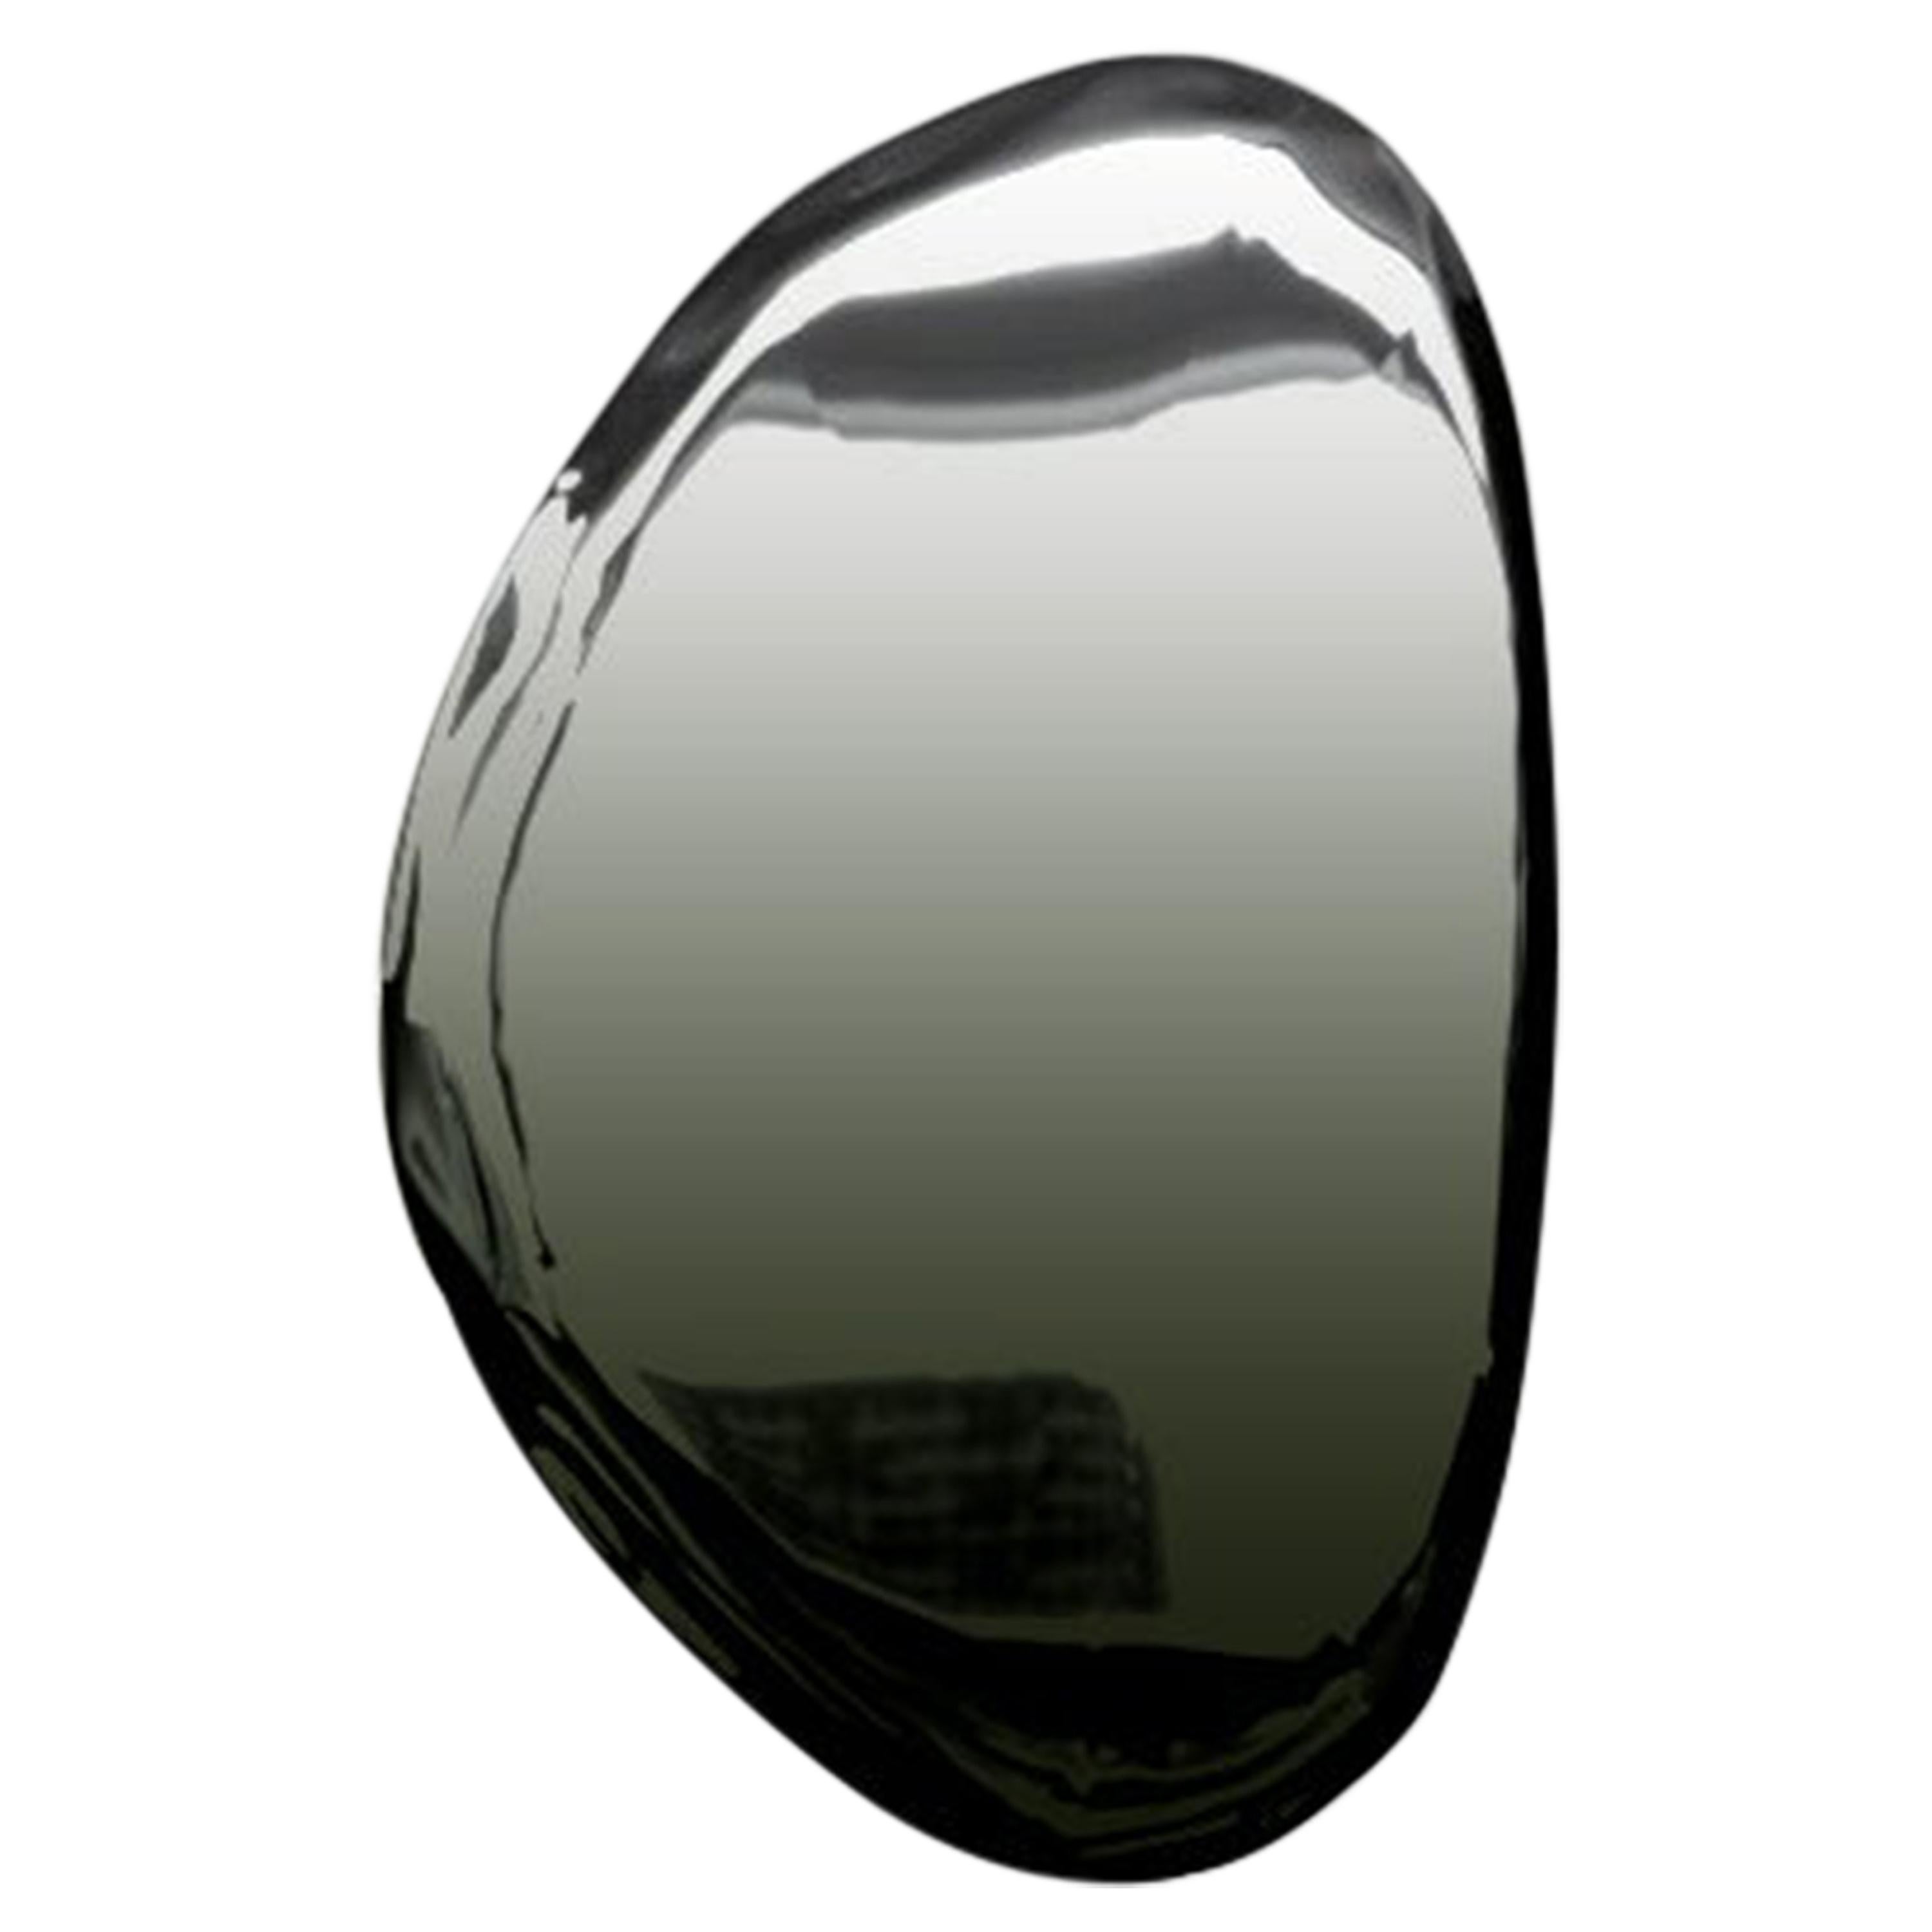 Tafla O3 Polished Dark Matter Color Stainless Steel Wall Mirror by Zieta